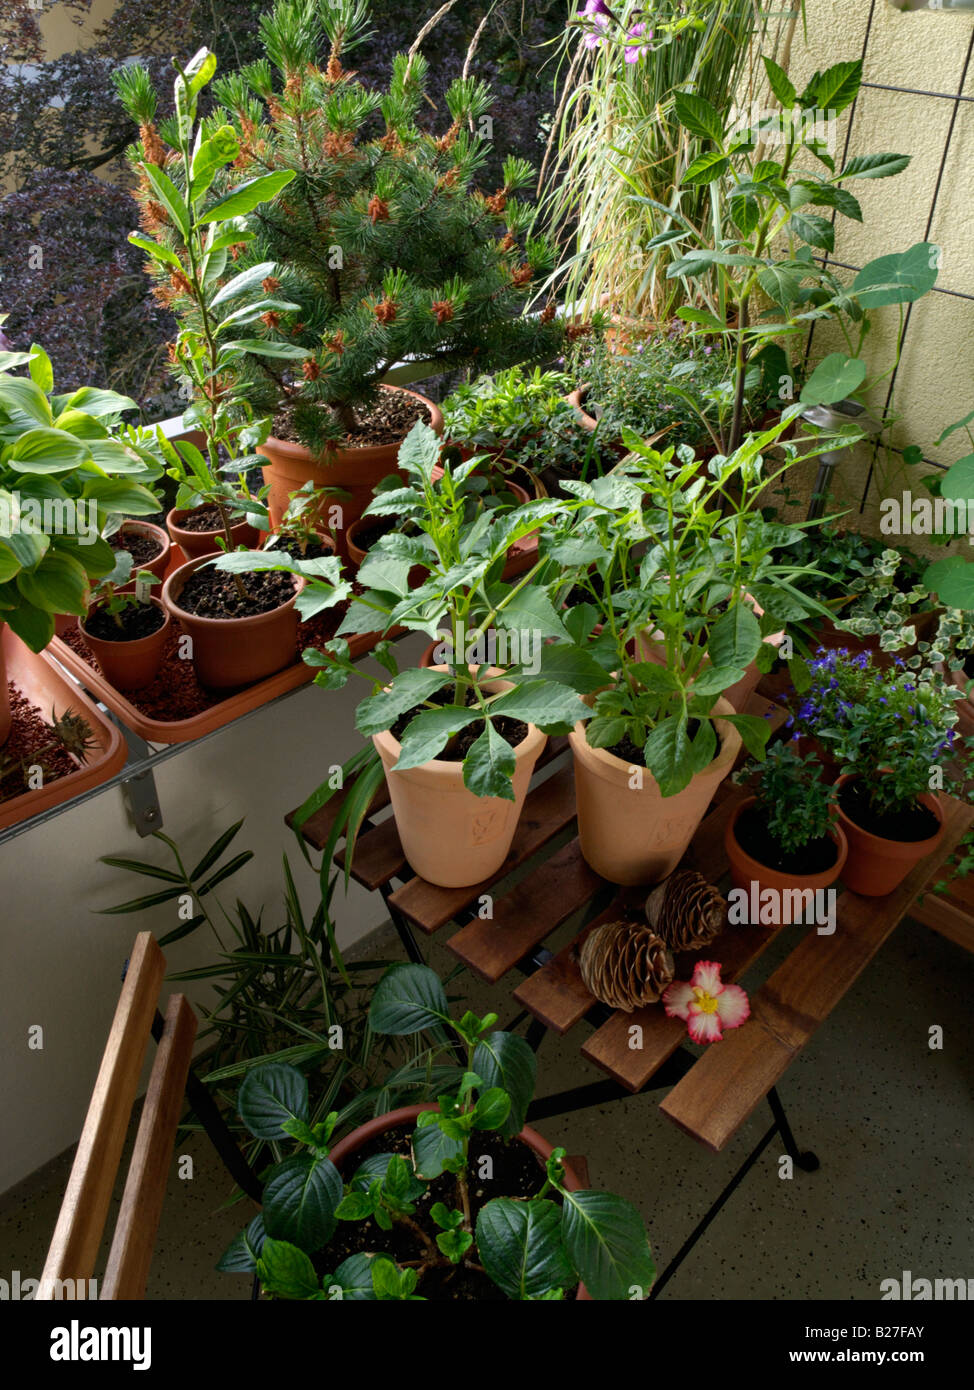 Balcony with numerous potted plants Stock Photo